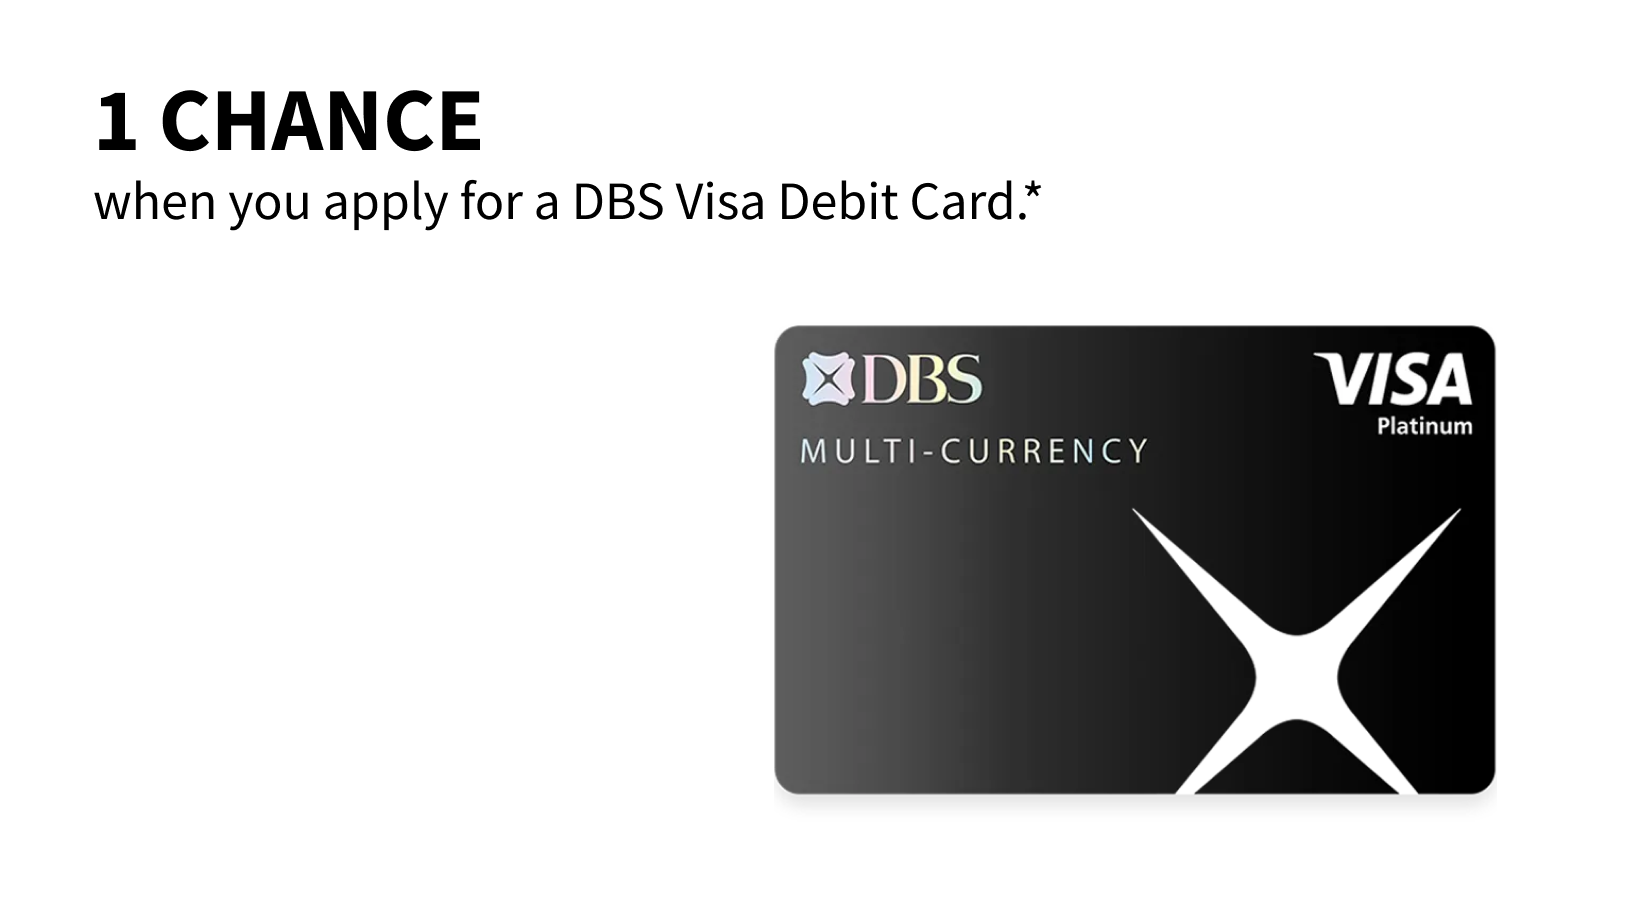 Get the ultimate card for all your overseas spends!